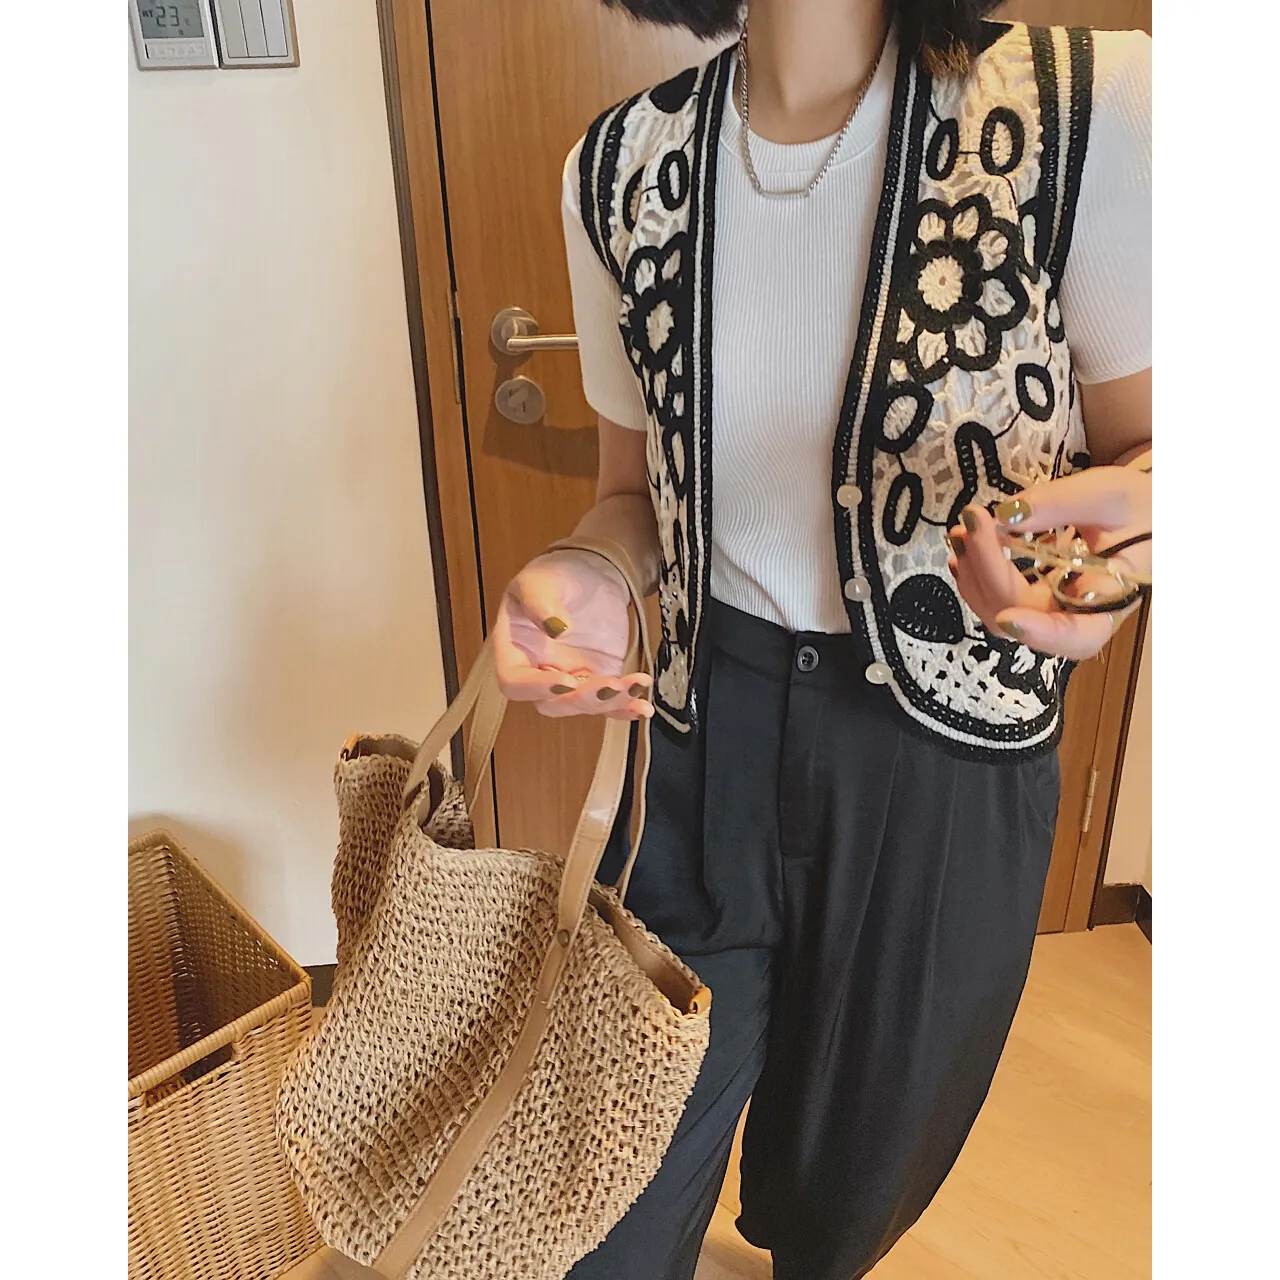 Women's Vests Za Oem Woman Spring Summer Superimposed Knit Sweaters Vests Y2k Waistcoat Sleeveless Clothes Vintage Crop Tops Cardigan 230209